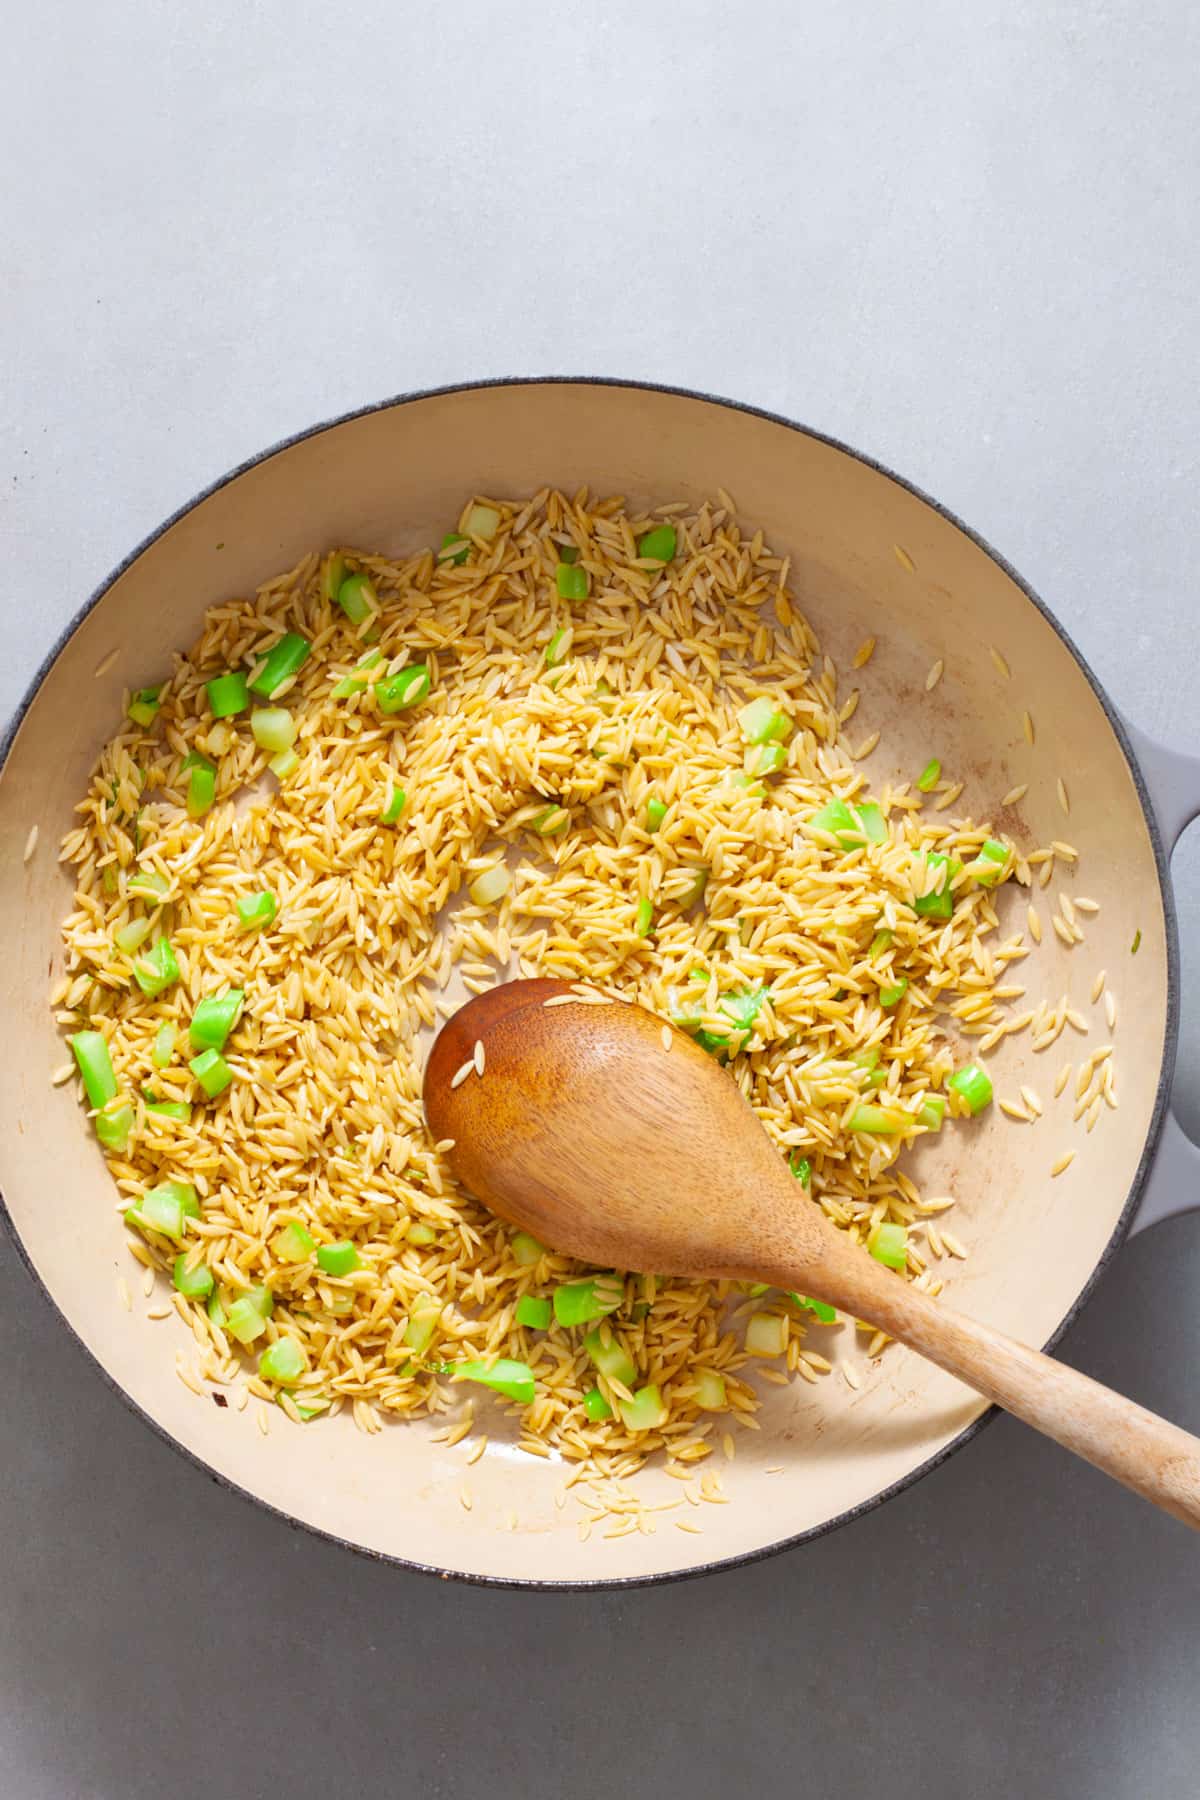 Orzo and chopped broccoli stem in a large skillet cooking in oil.